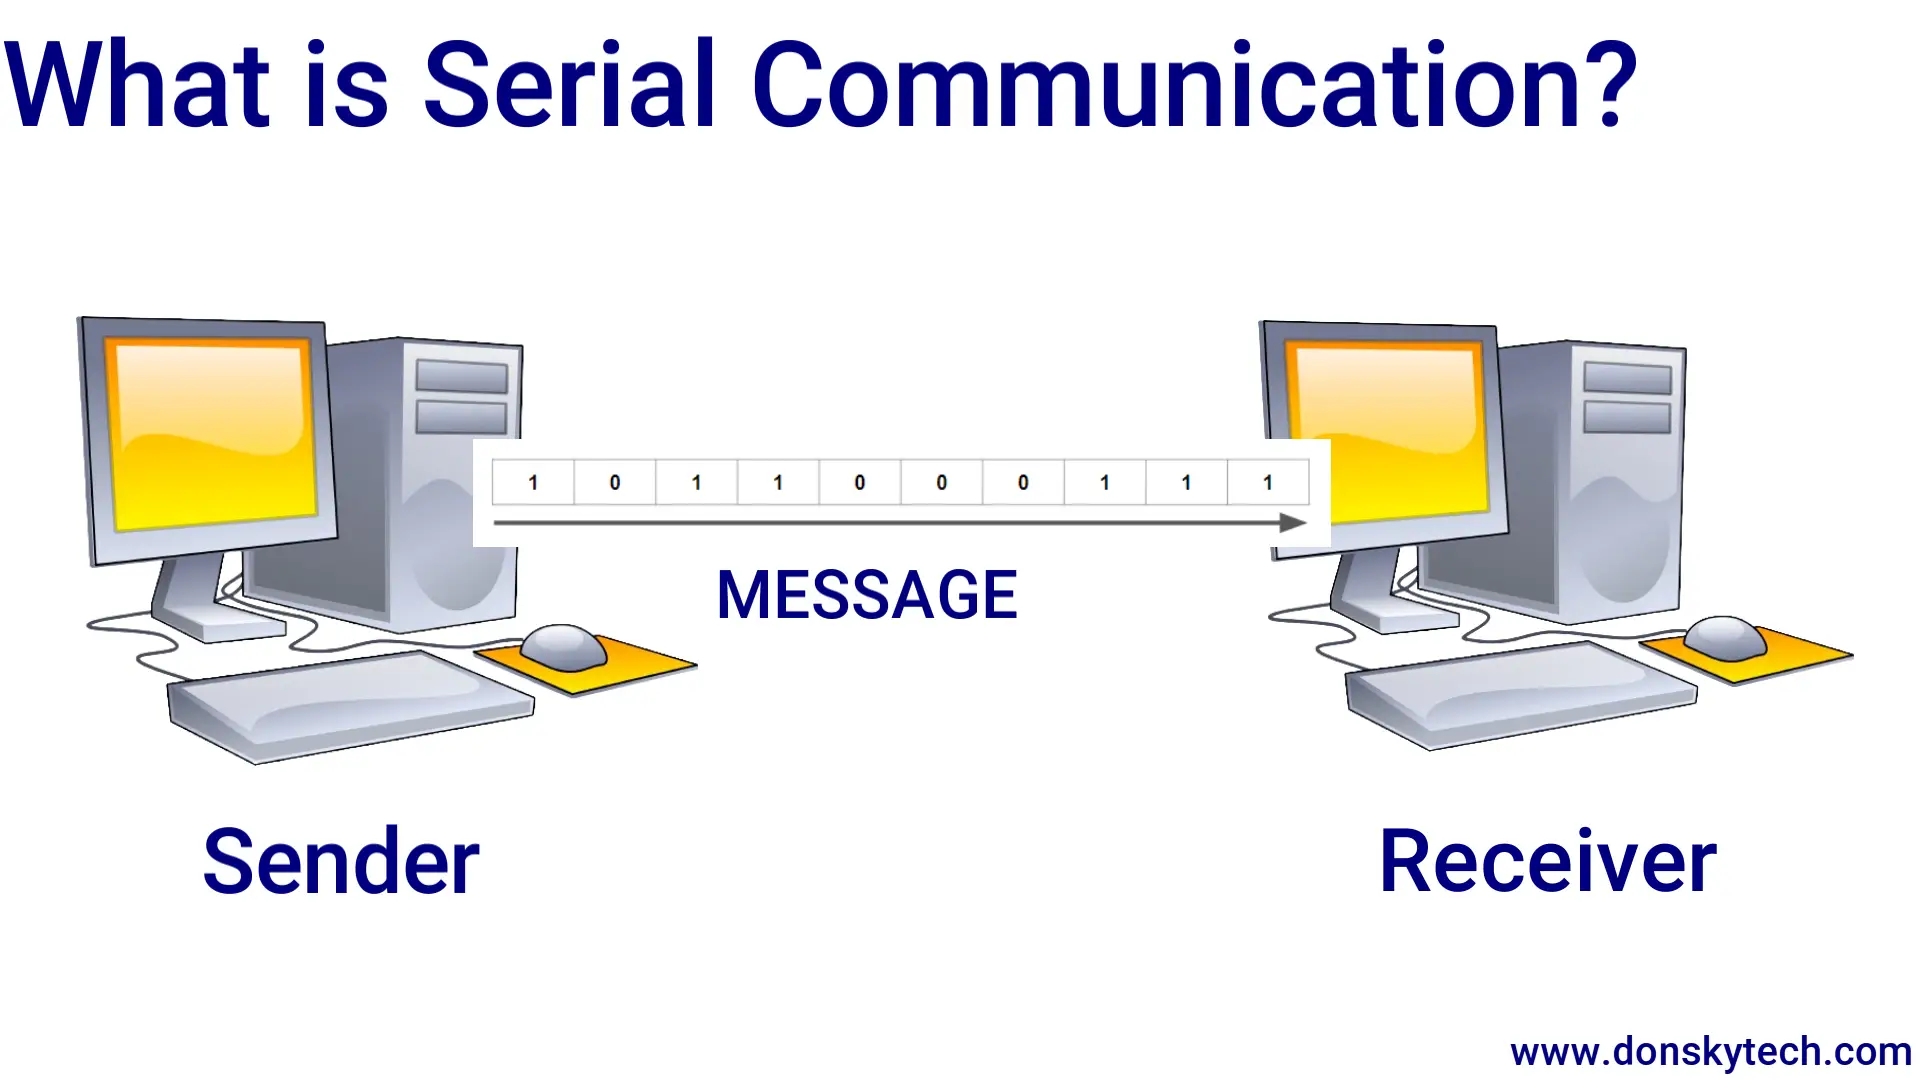 What is Serial Communication